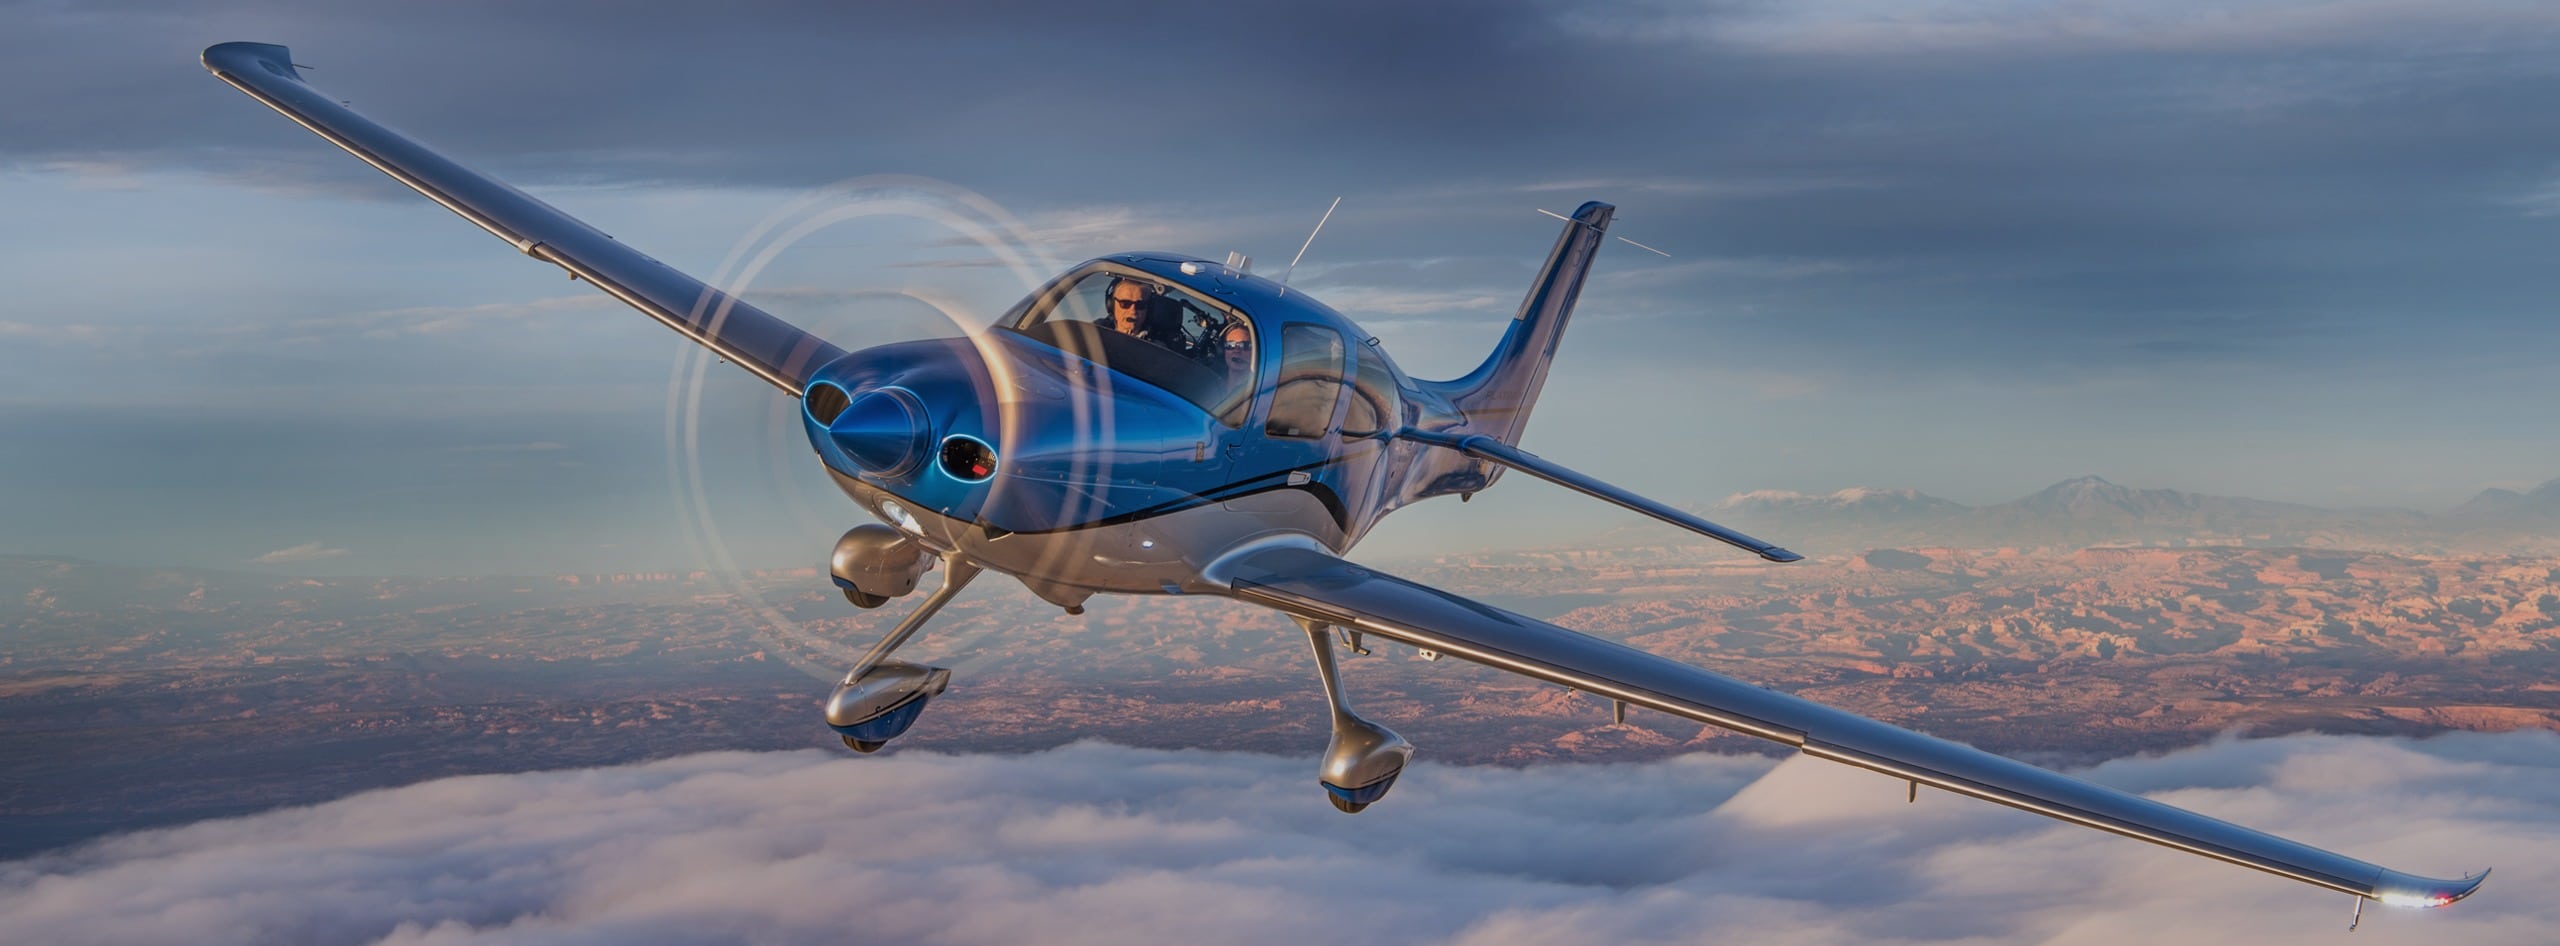 Cirrus Aircraft Pre-Owned Network